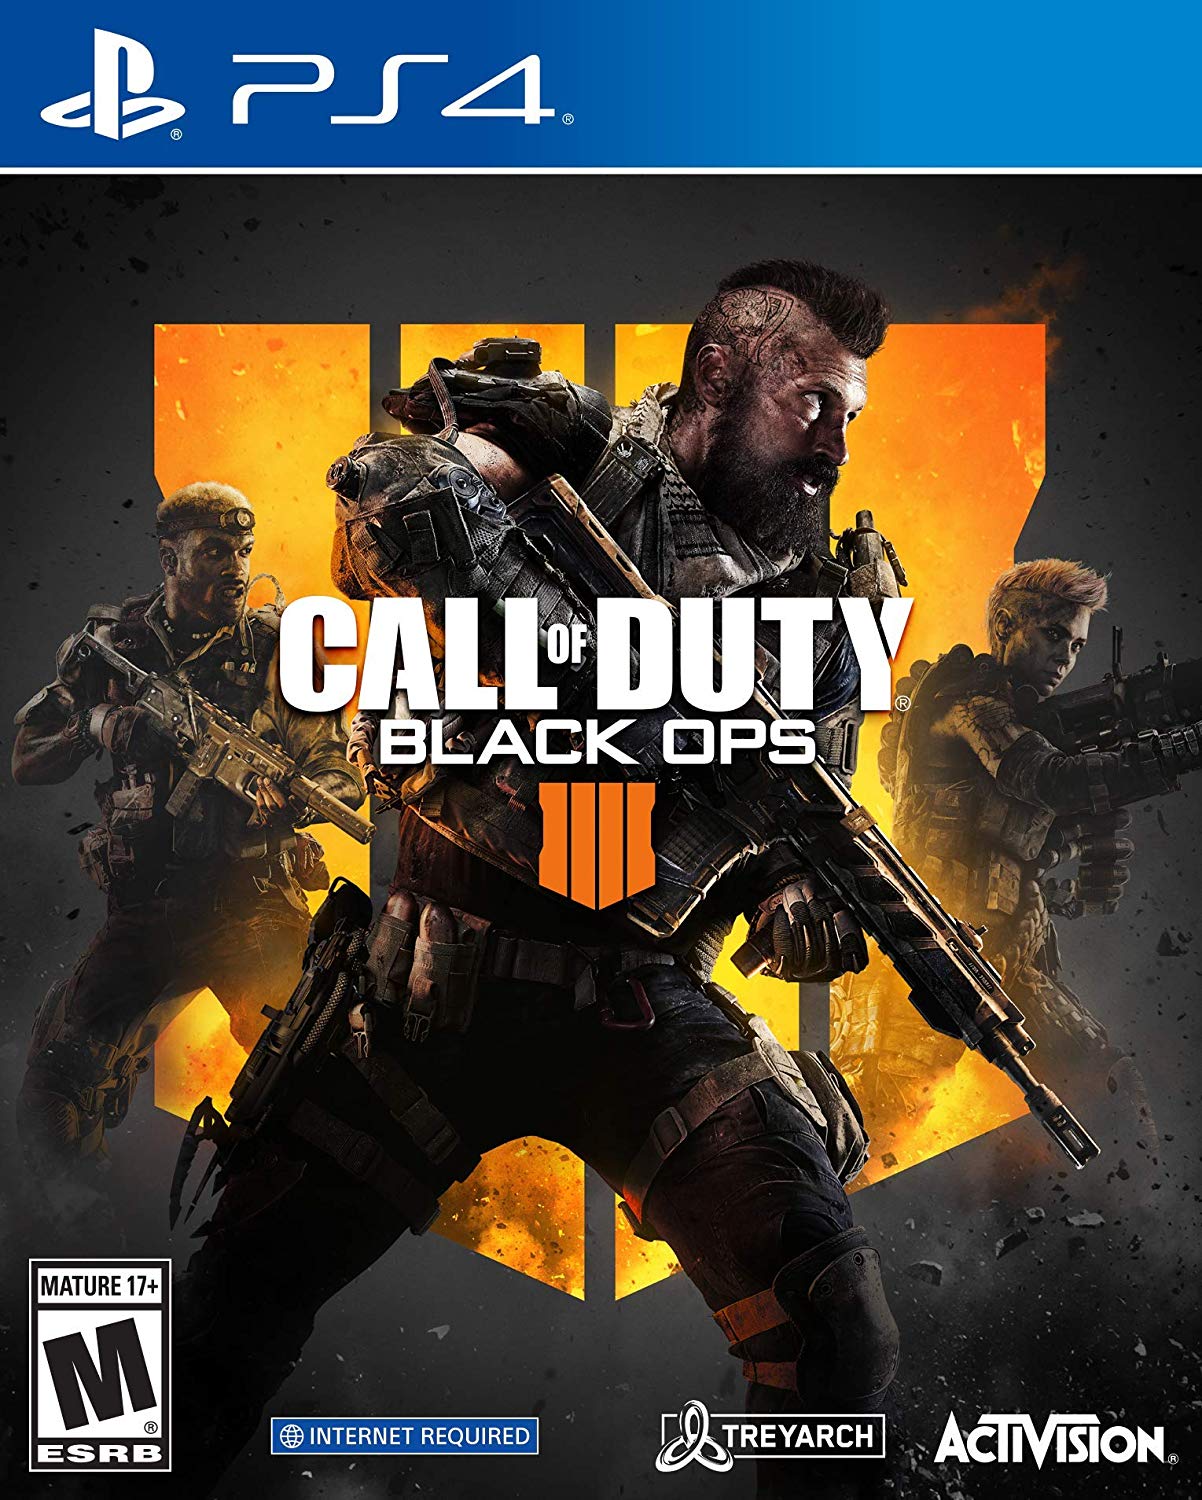 PS4 CALL OF DUTY: BLACK OPS 4 / PS4-PS4 CALL OF DUTY: BLACK OPS 4 / PS4